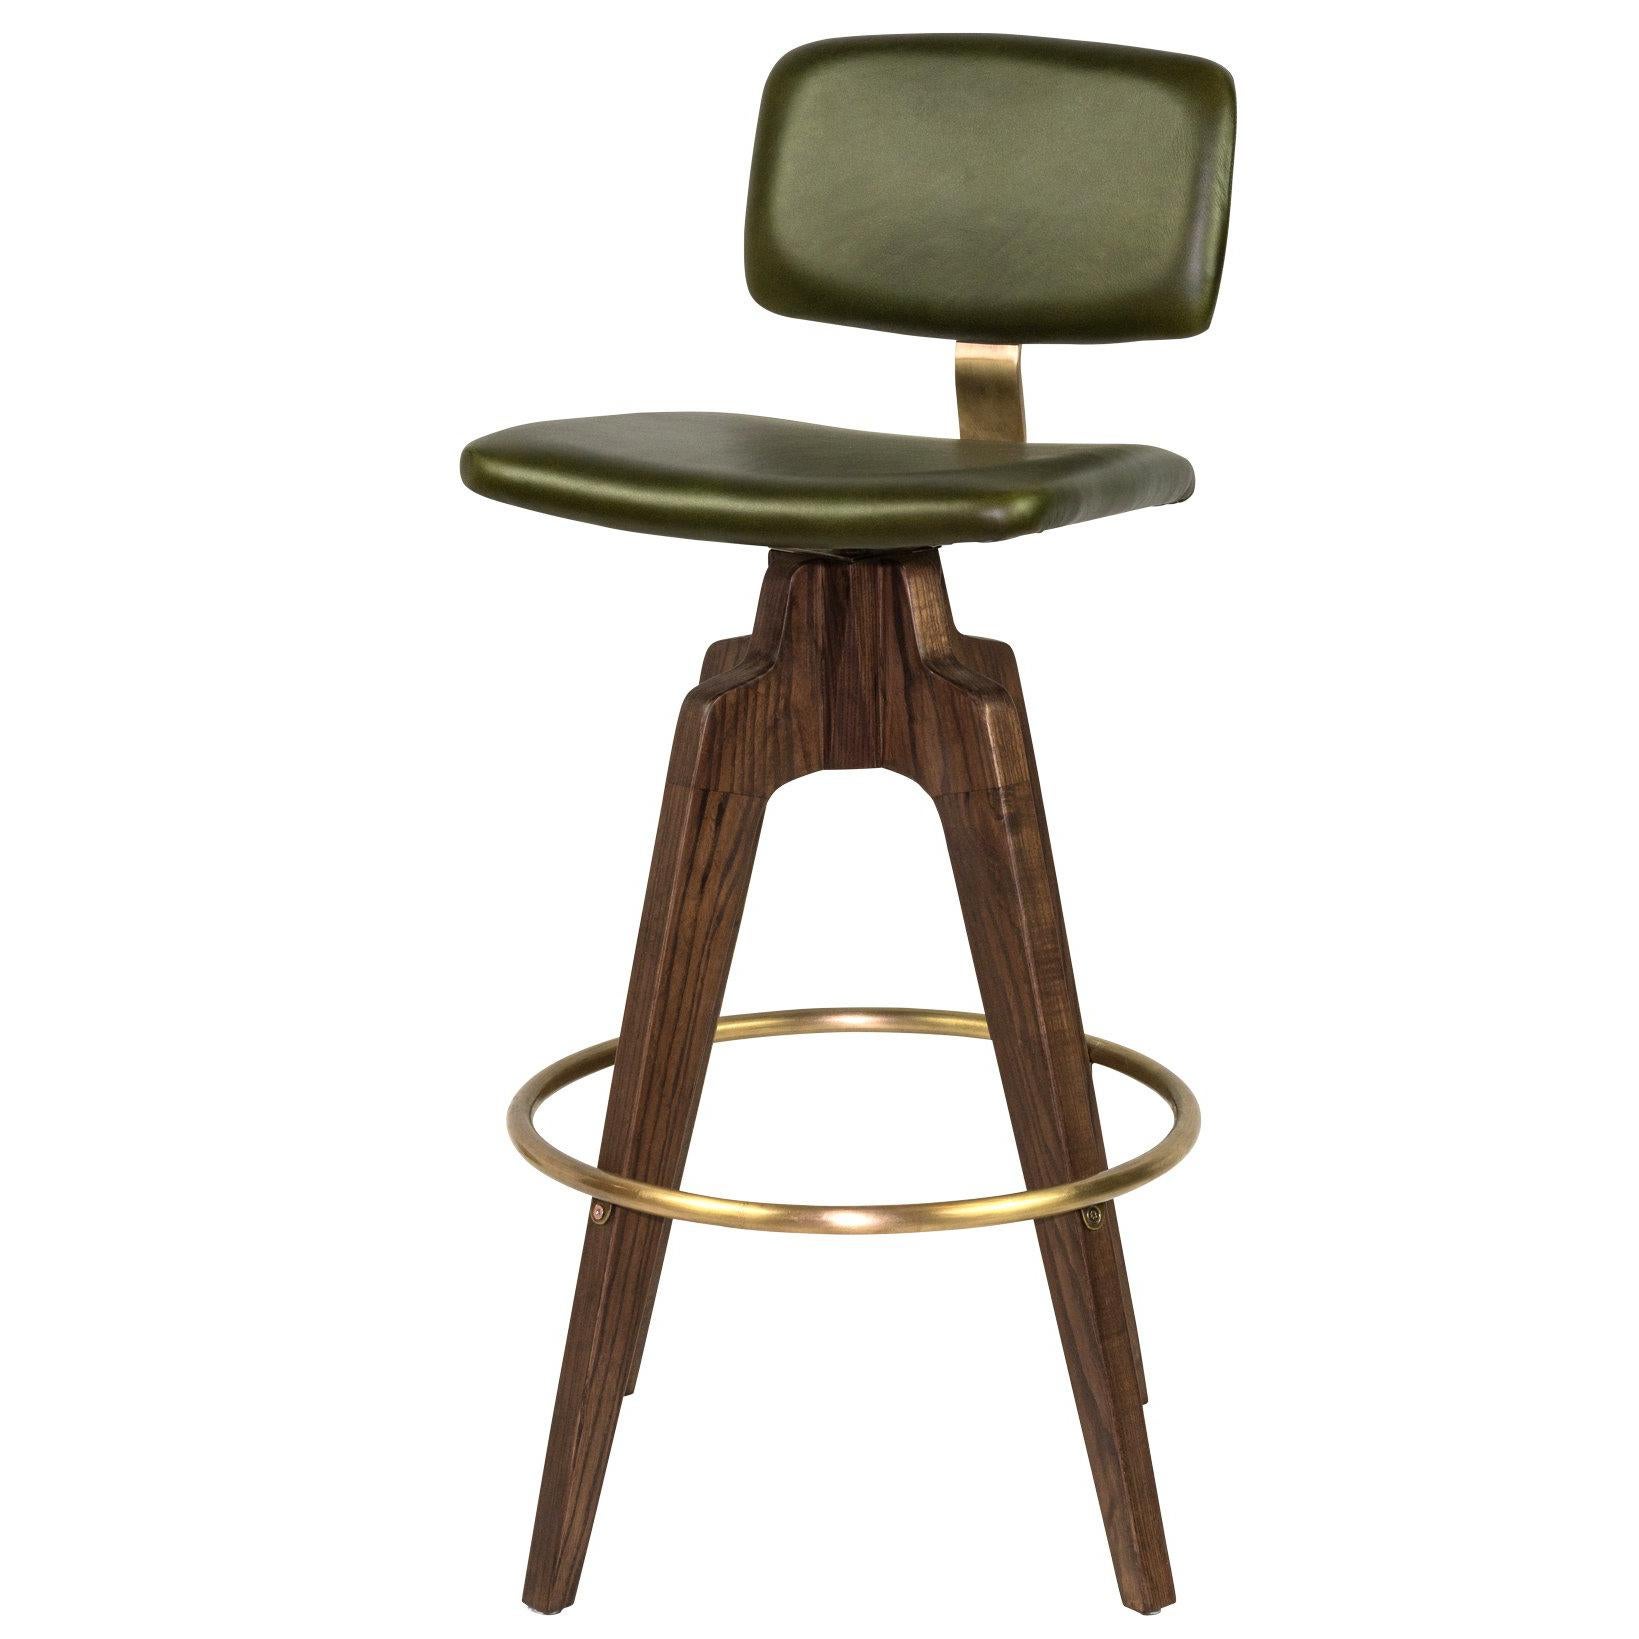 Reeves Swivel Bar or Counter Stool W/ Ash stained Walnut legs & Brass Finish. 